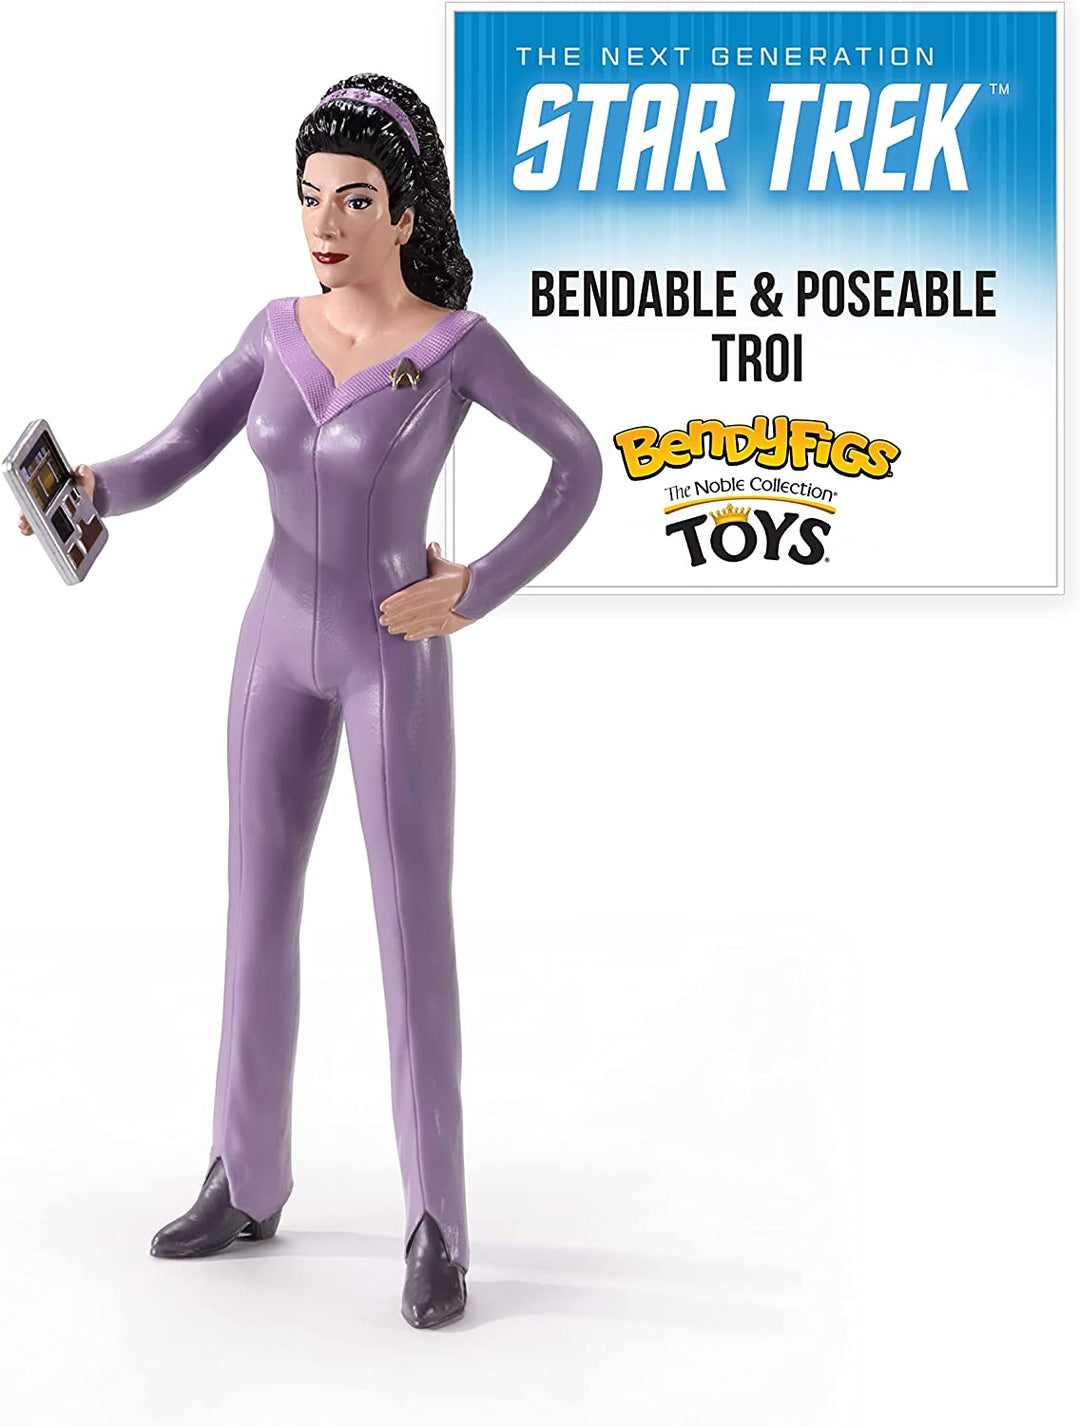 The Noble Collection Star Trek Bendyfigs Troi - 7.5in (19cm) Noble Toys Bendable